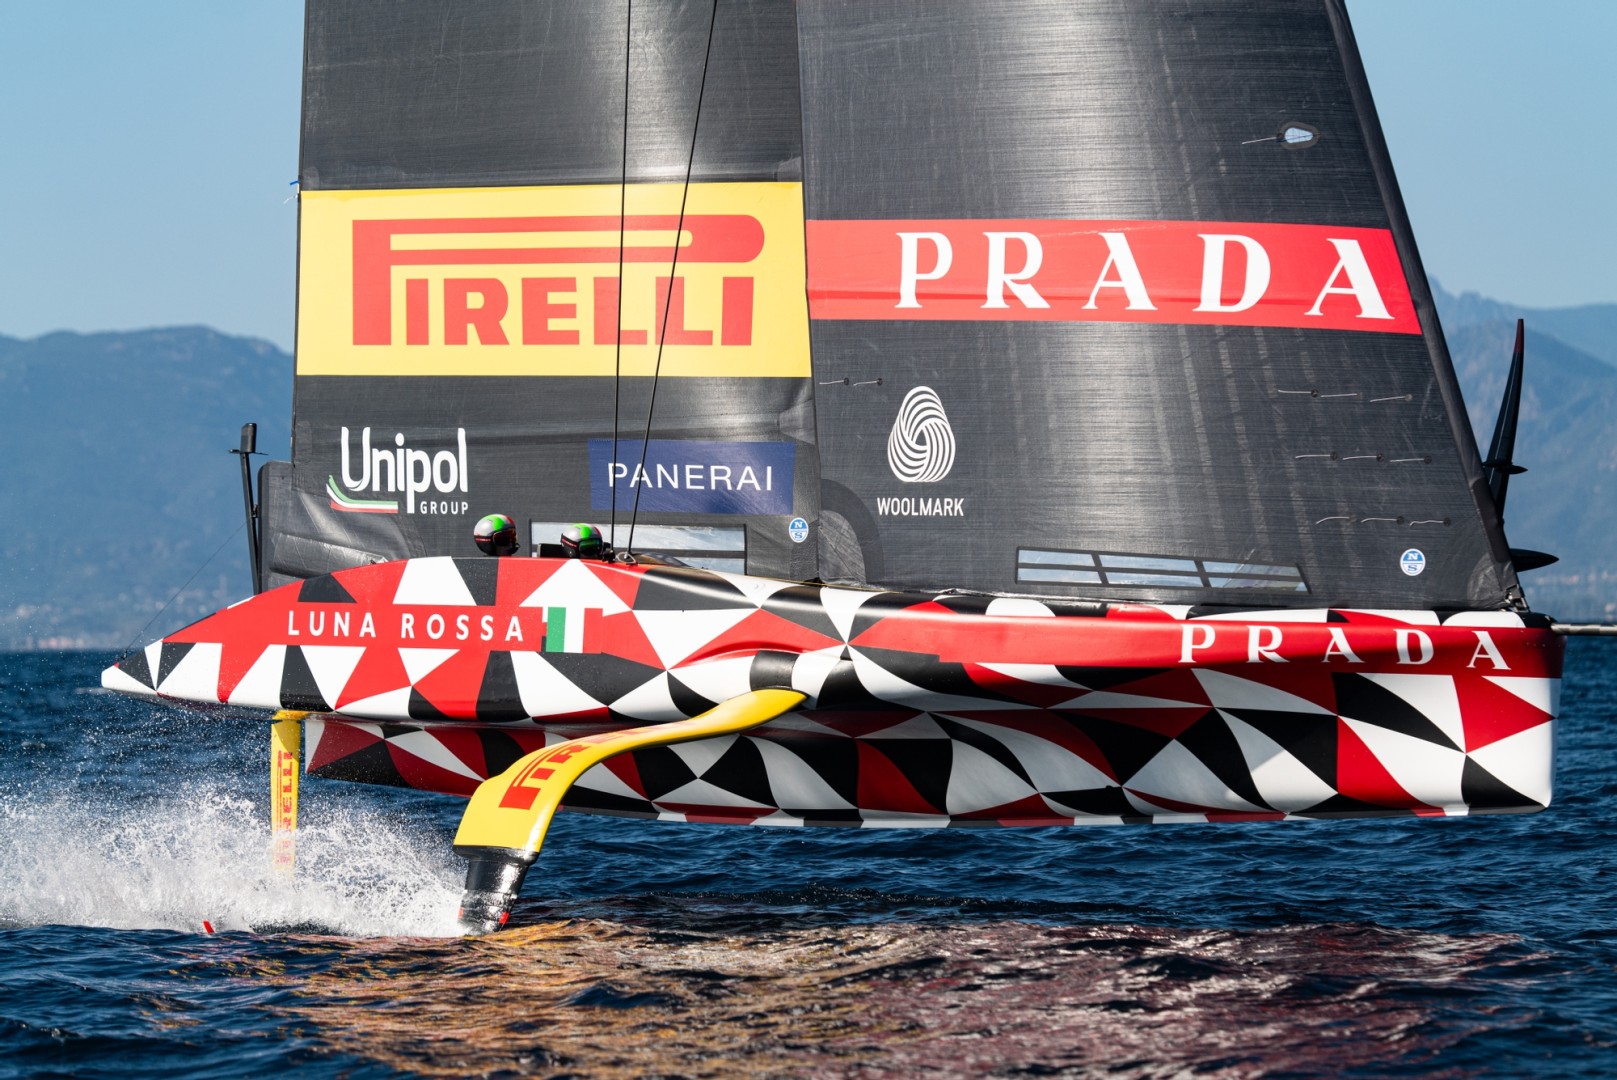 America's Cup, race practice intensifying in Cagliari and Jeddah